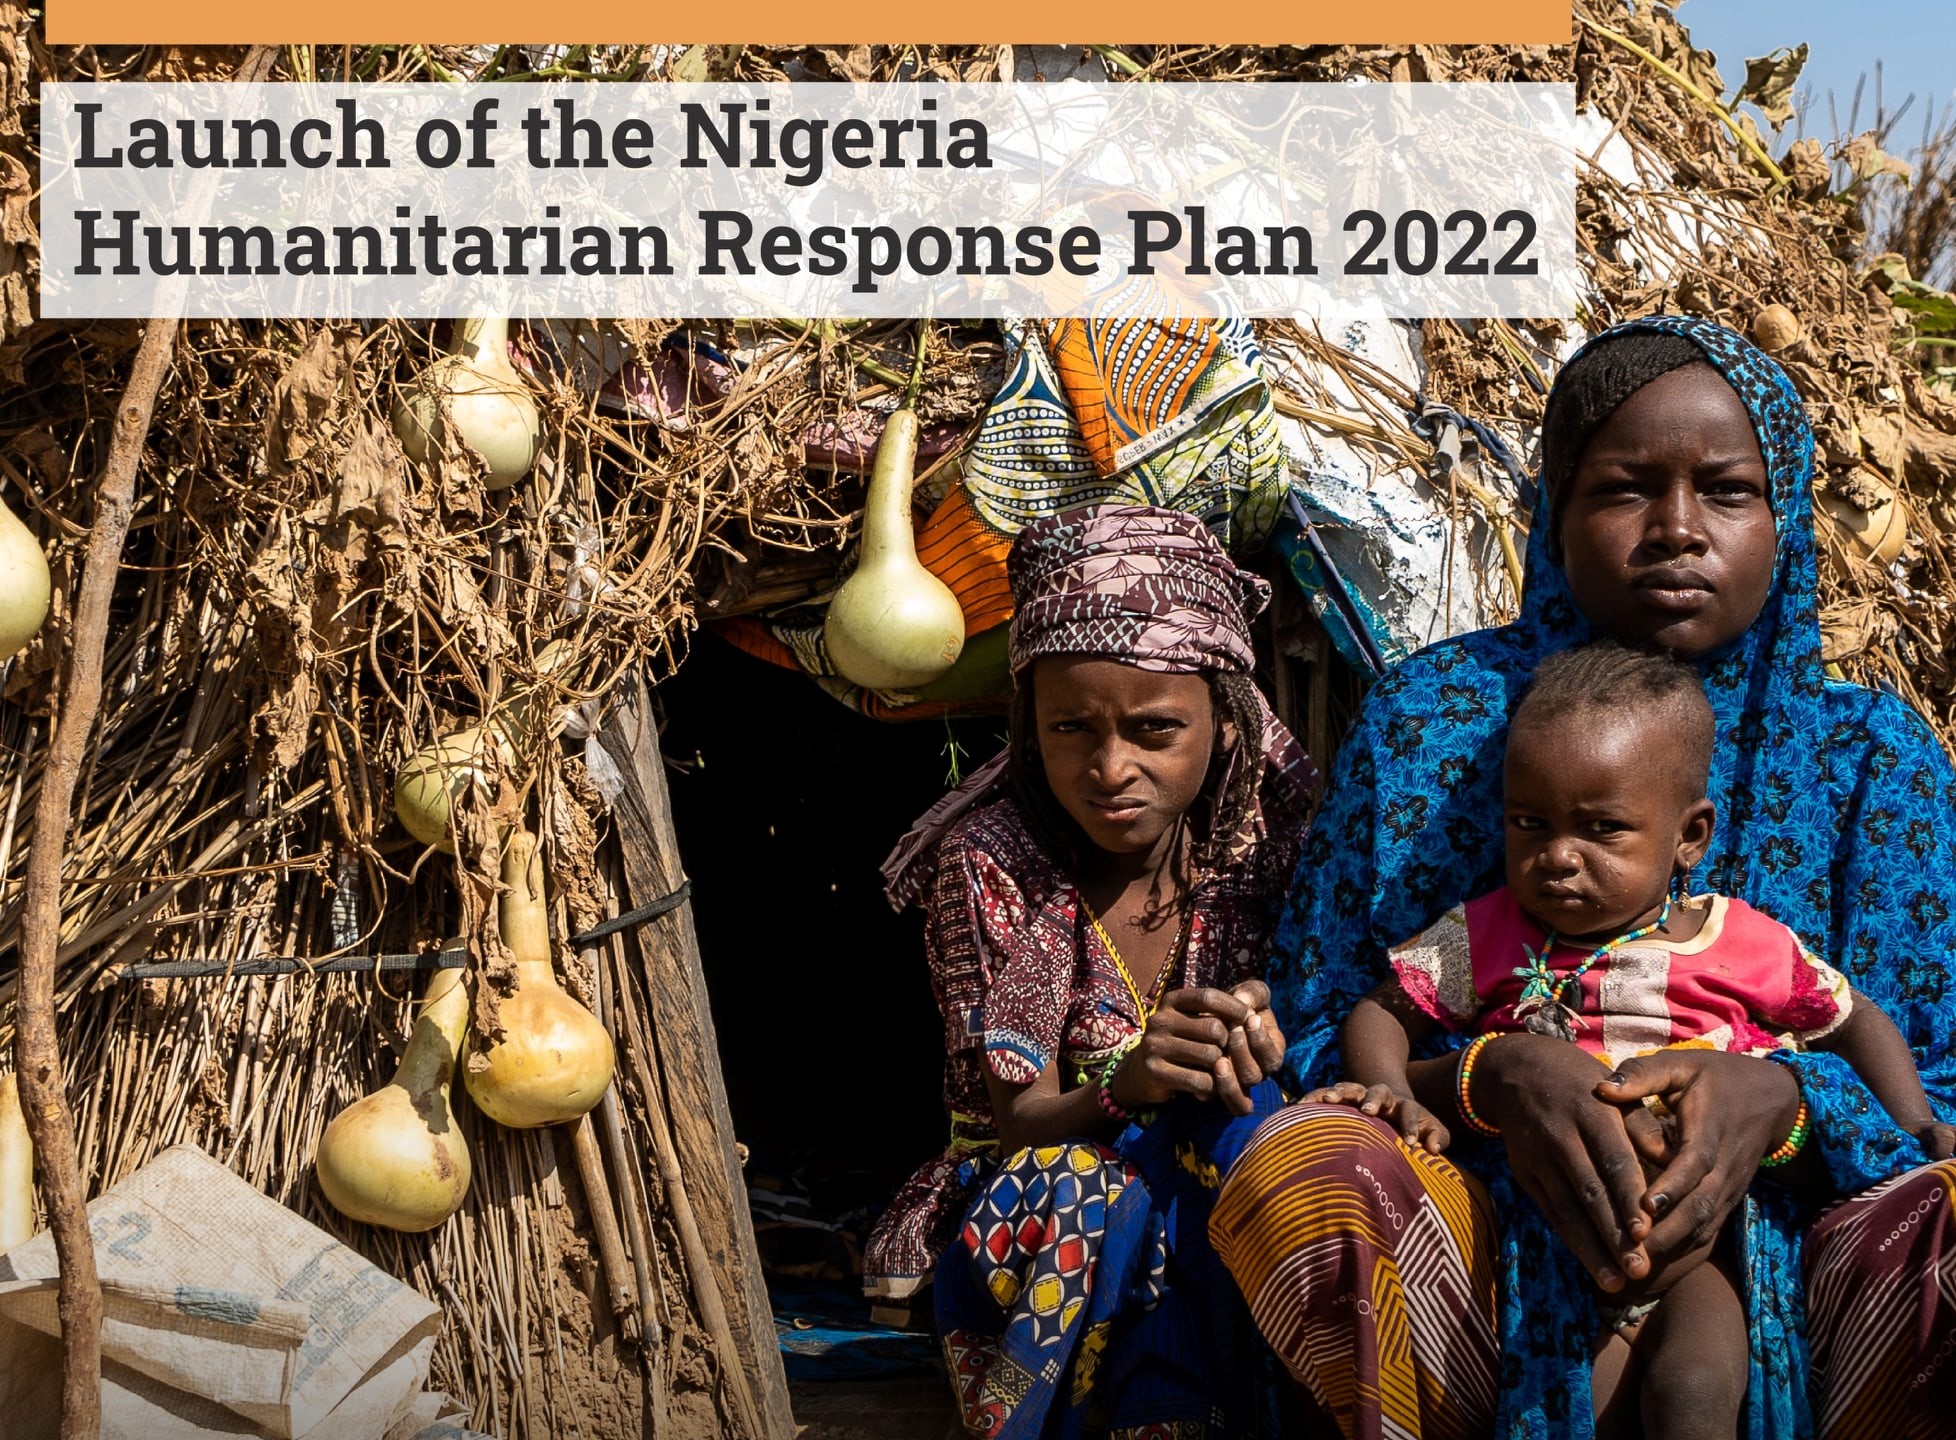 US$1.1 billion needed to reach 5.5 million people in north-east Nigeria with humanitarian assistance in 2022